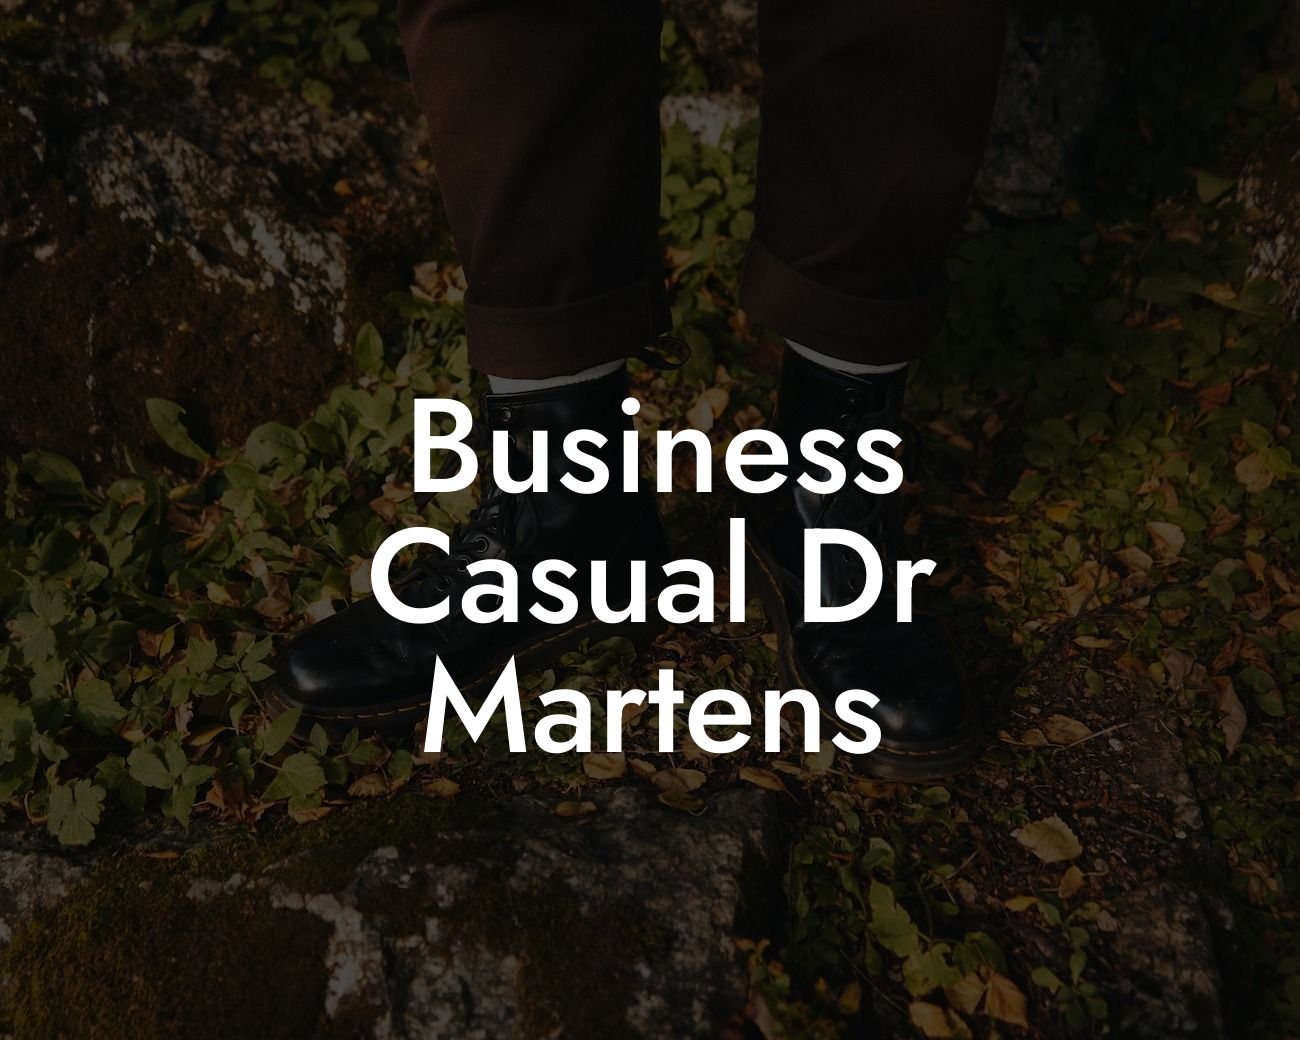 Business Casual Dr Martens